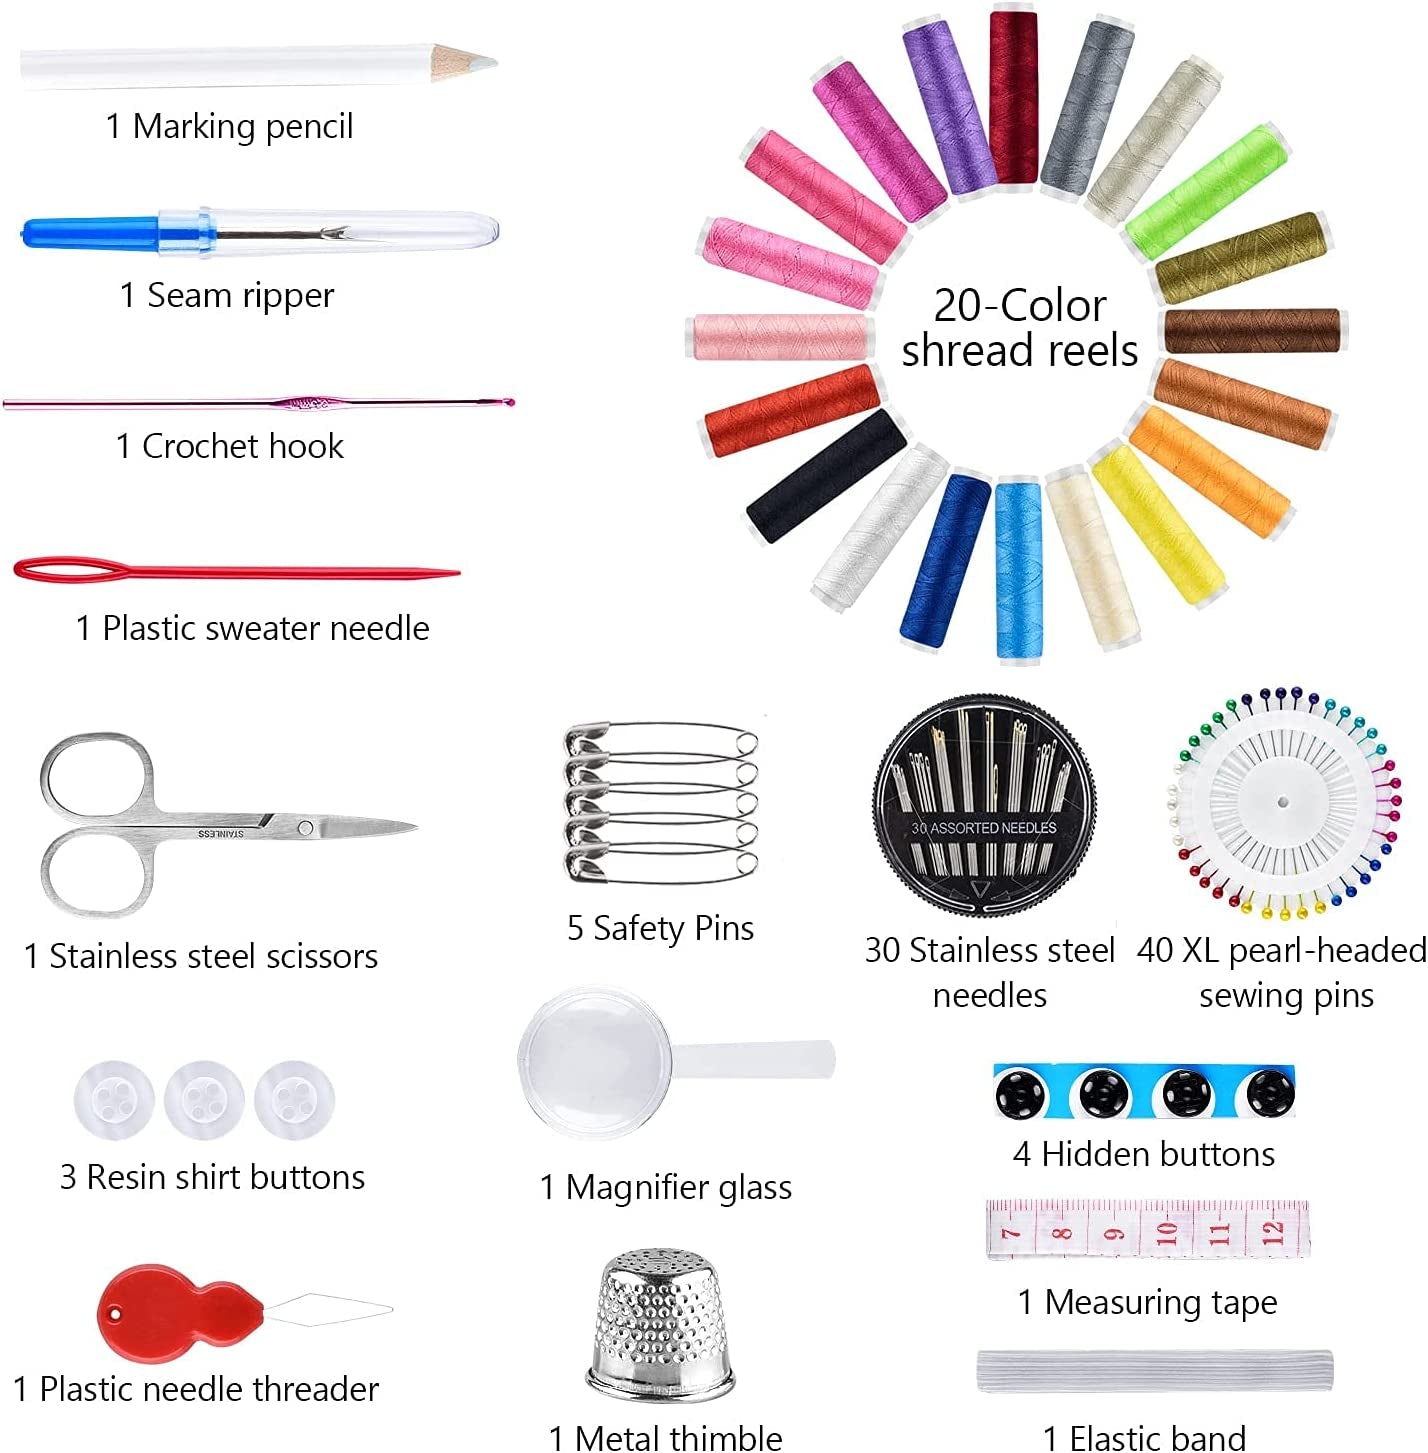 Sewing Kit, Small Sewing Kit 113 Piece Sewing Accessories with Zipper Case, for Home,Travel,Emergency,Adults and Beginners,With Mending,Scissors,Needles and Thread Kits Tape Measure Etc